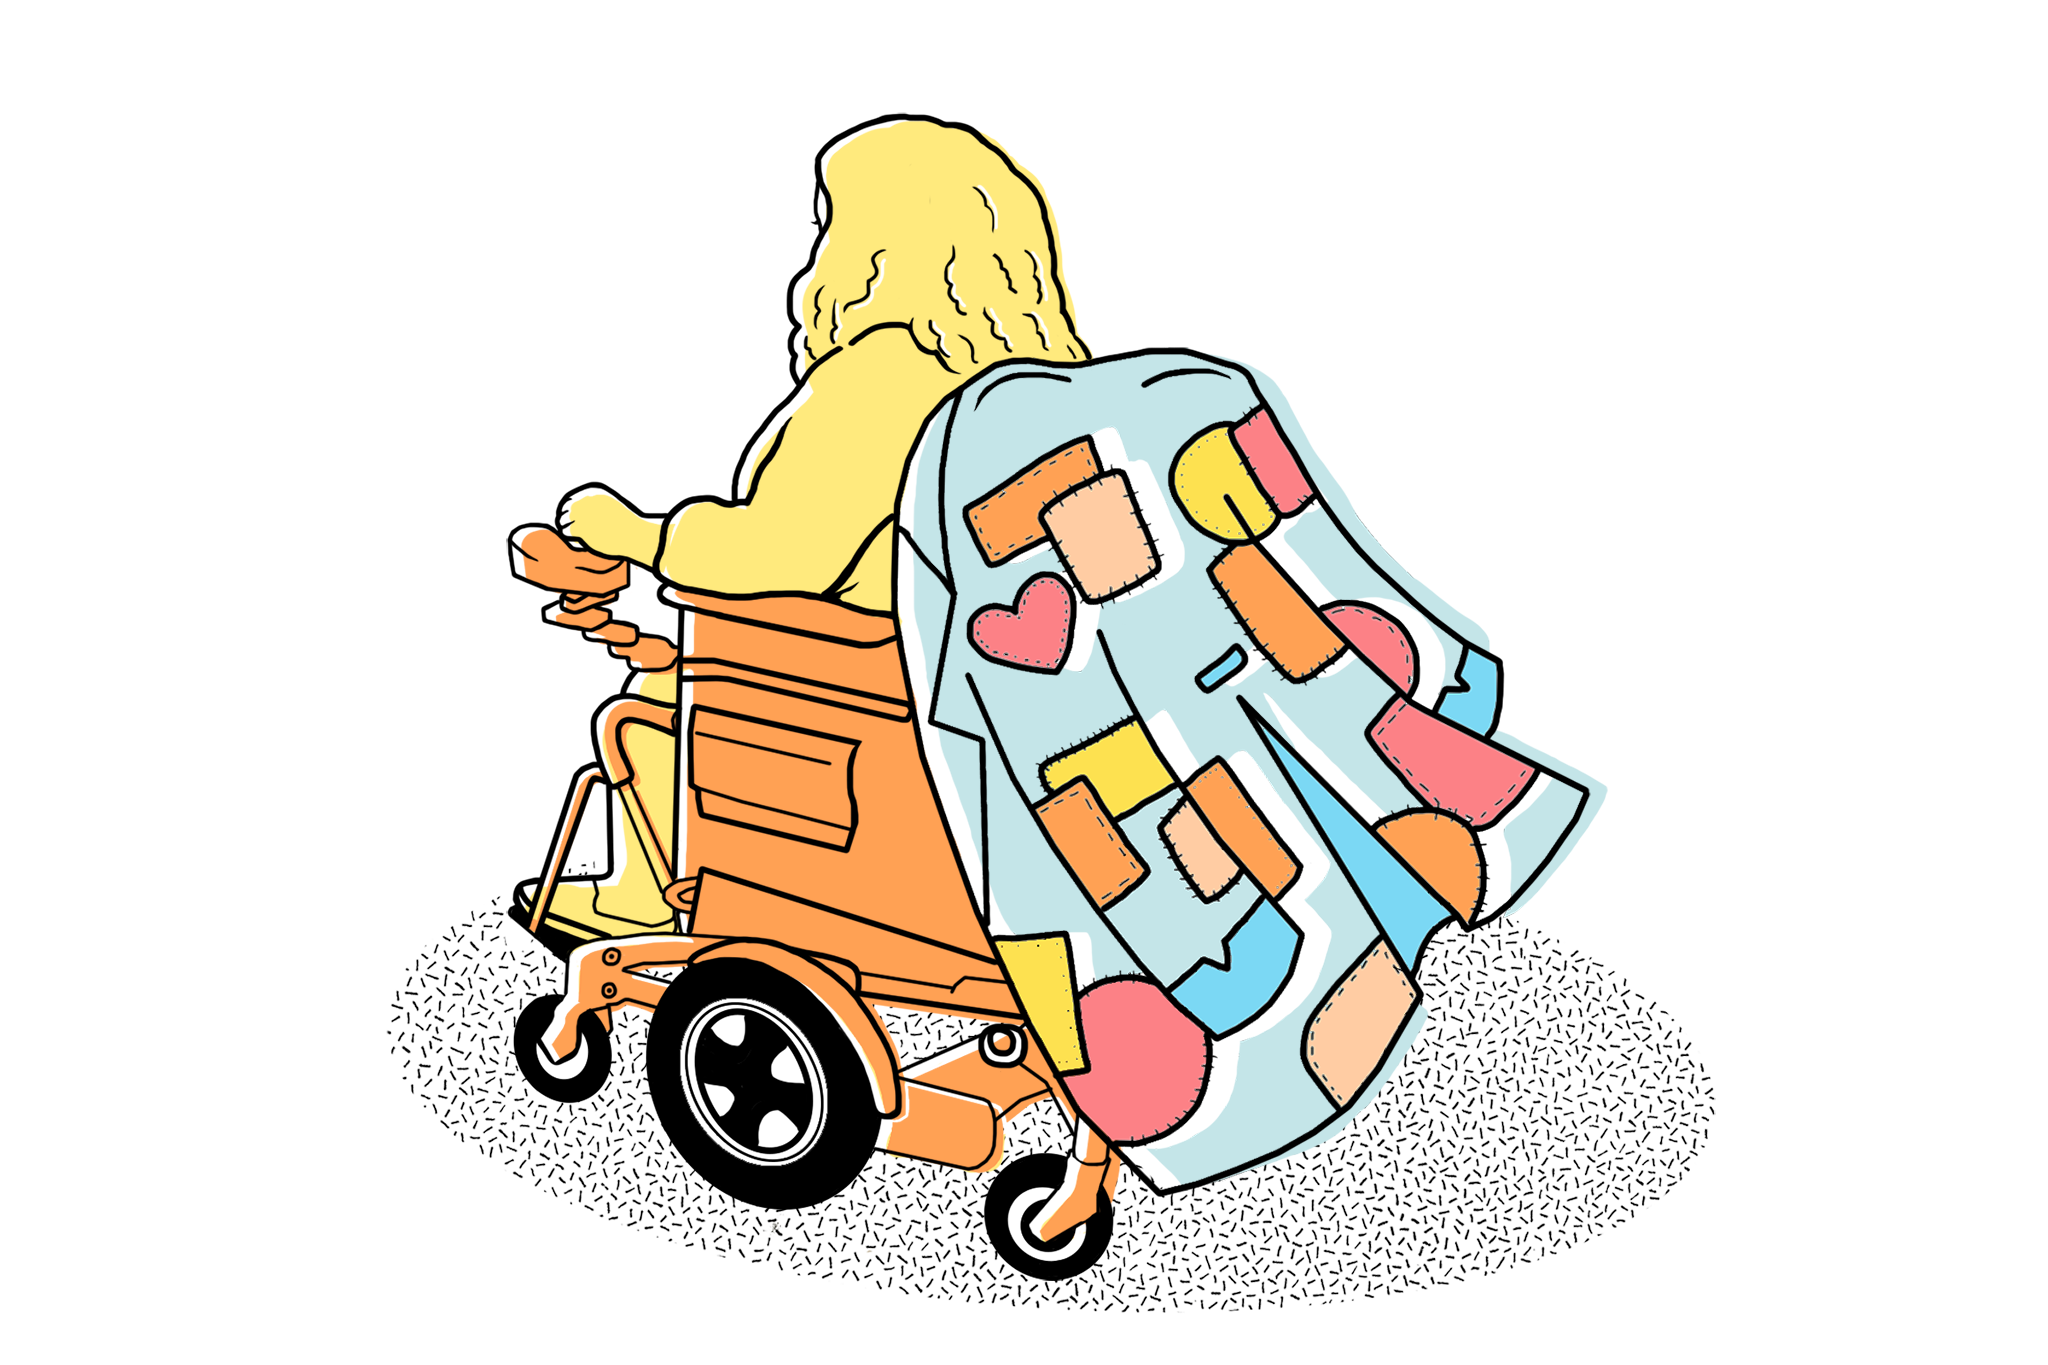 An illustration of a person in a wheelchair with a coat draped over the back that has many repaired patches